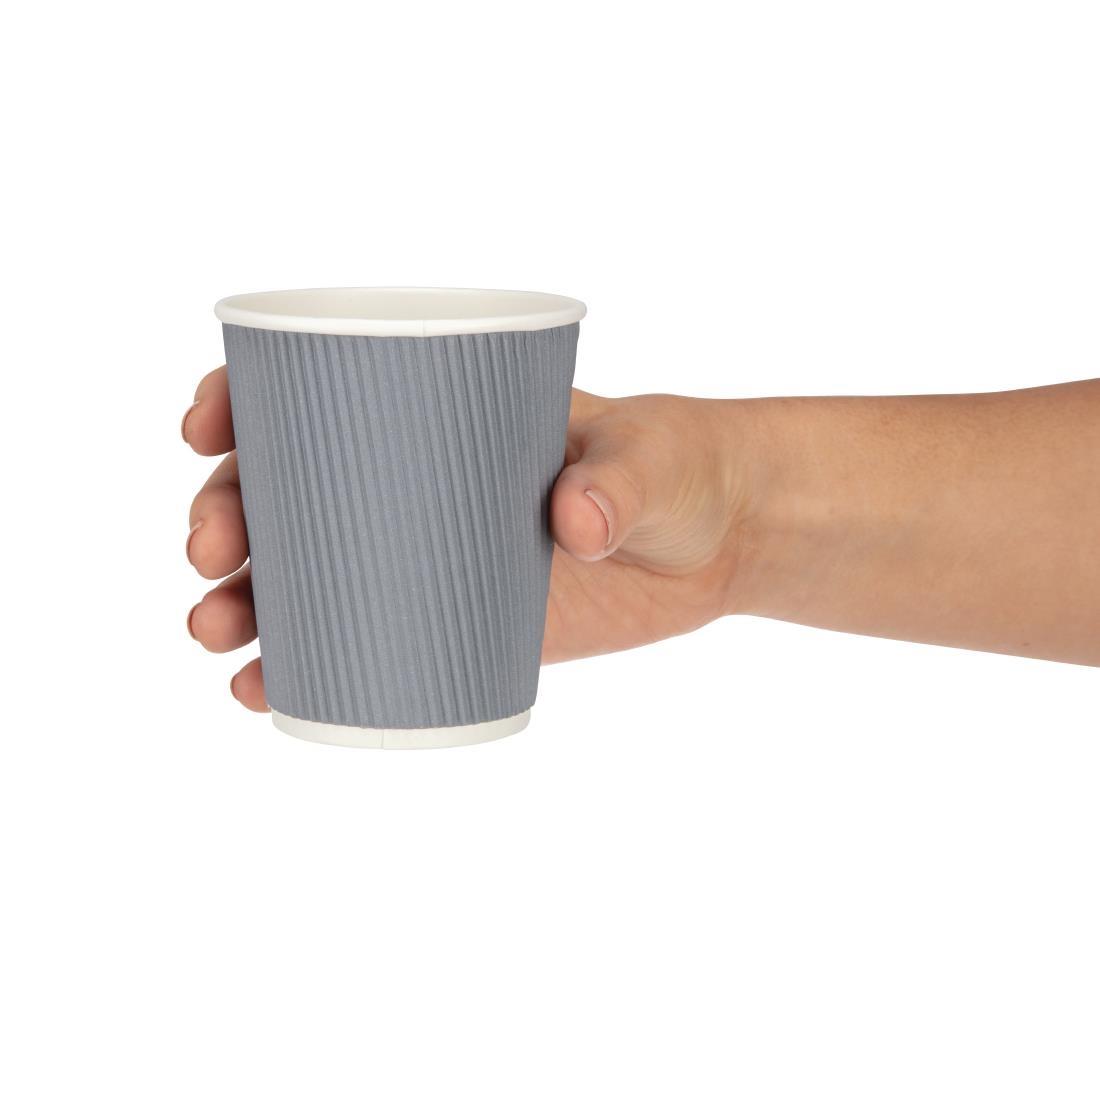 Fiesta Recyclable Coffee Cups Ripple Wall Charcoal 225ml / 8oz (Pack of 500) - GP433  - 3